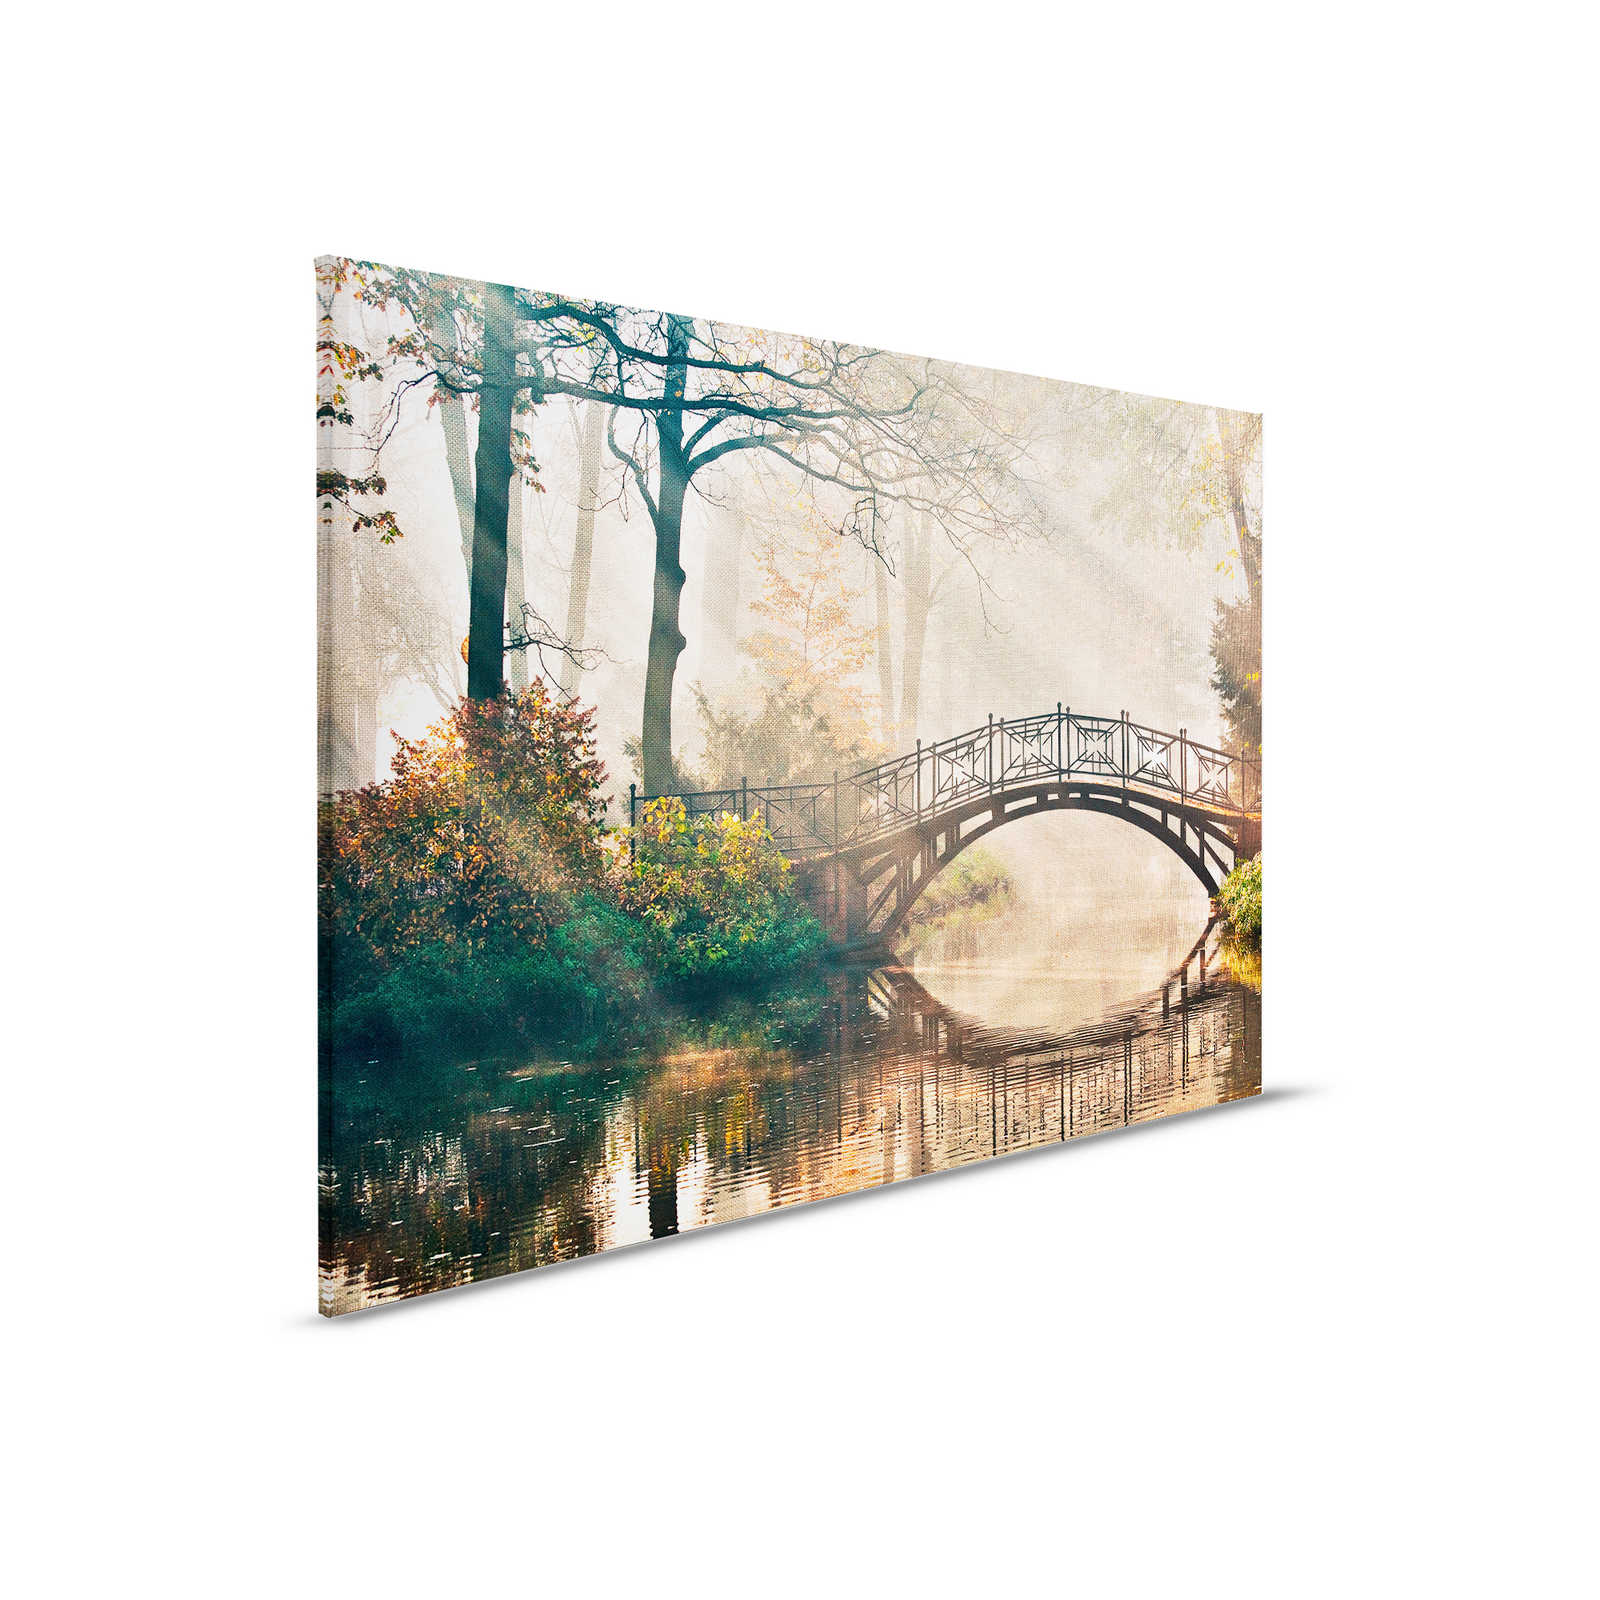         Canvas with bridge over a river in a deciduous forest - 0.90 m x 0.60 m
    